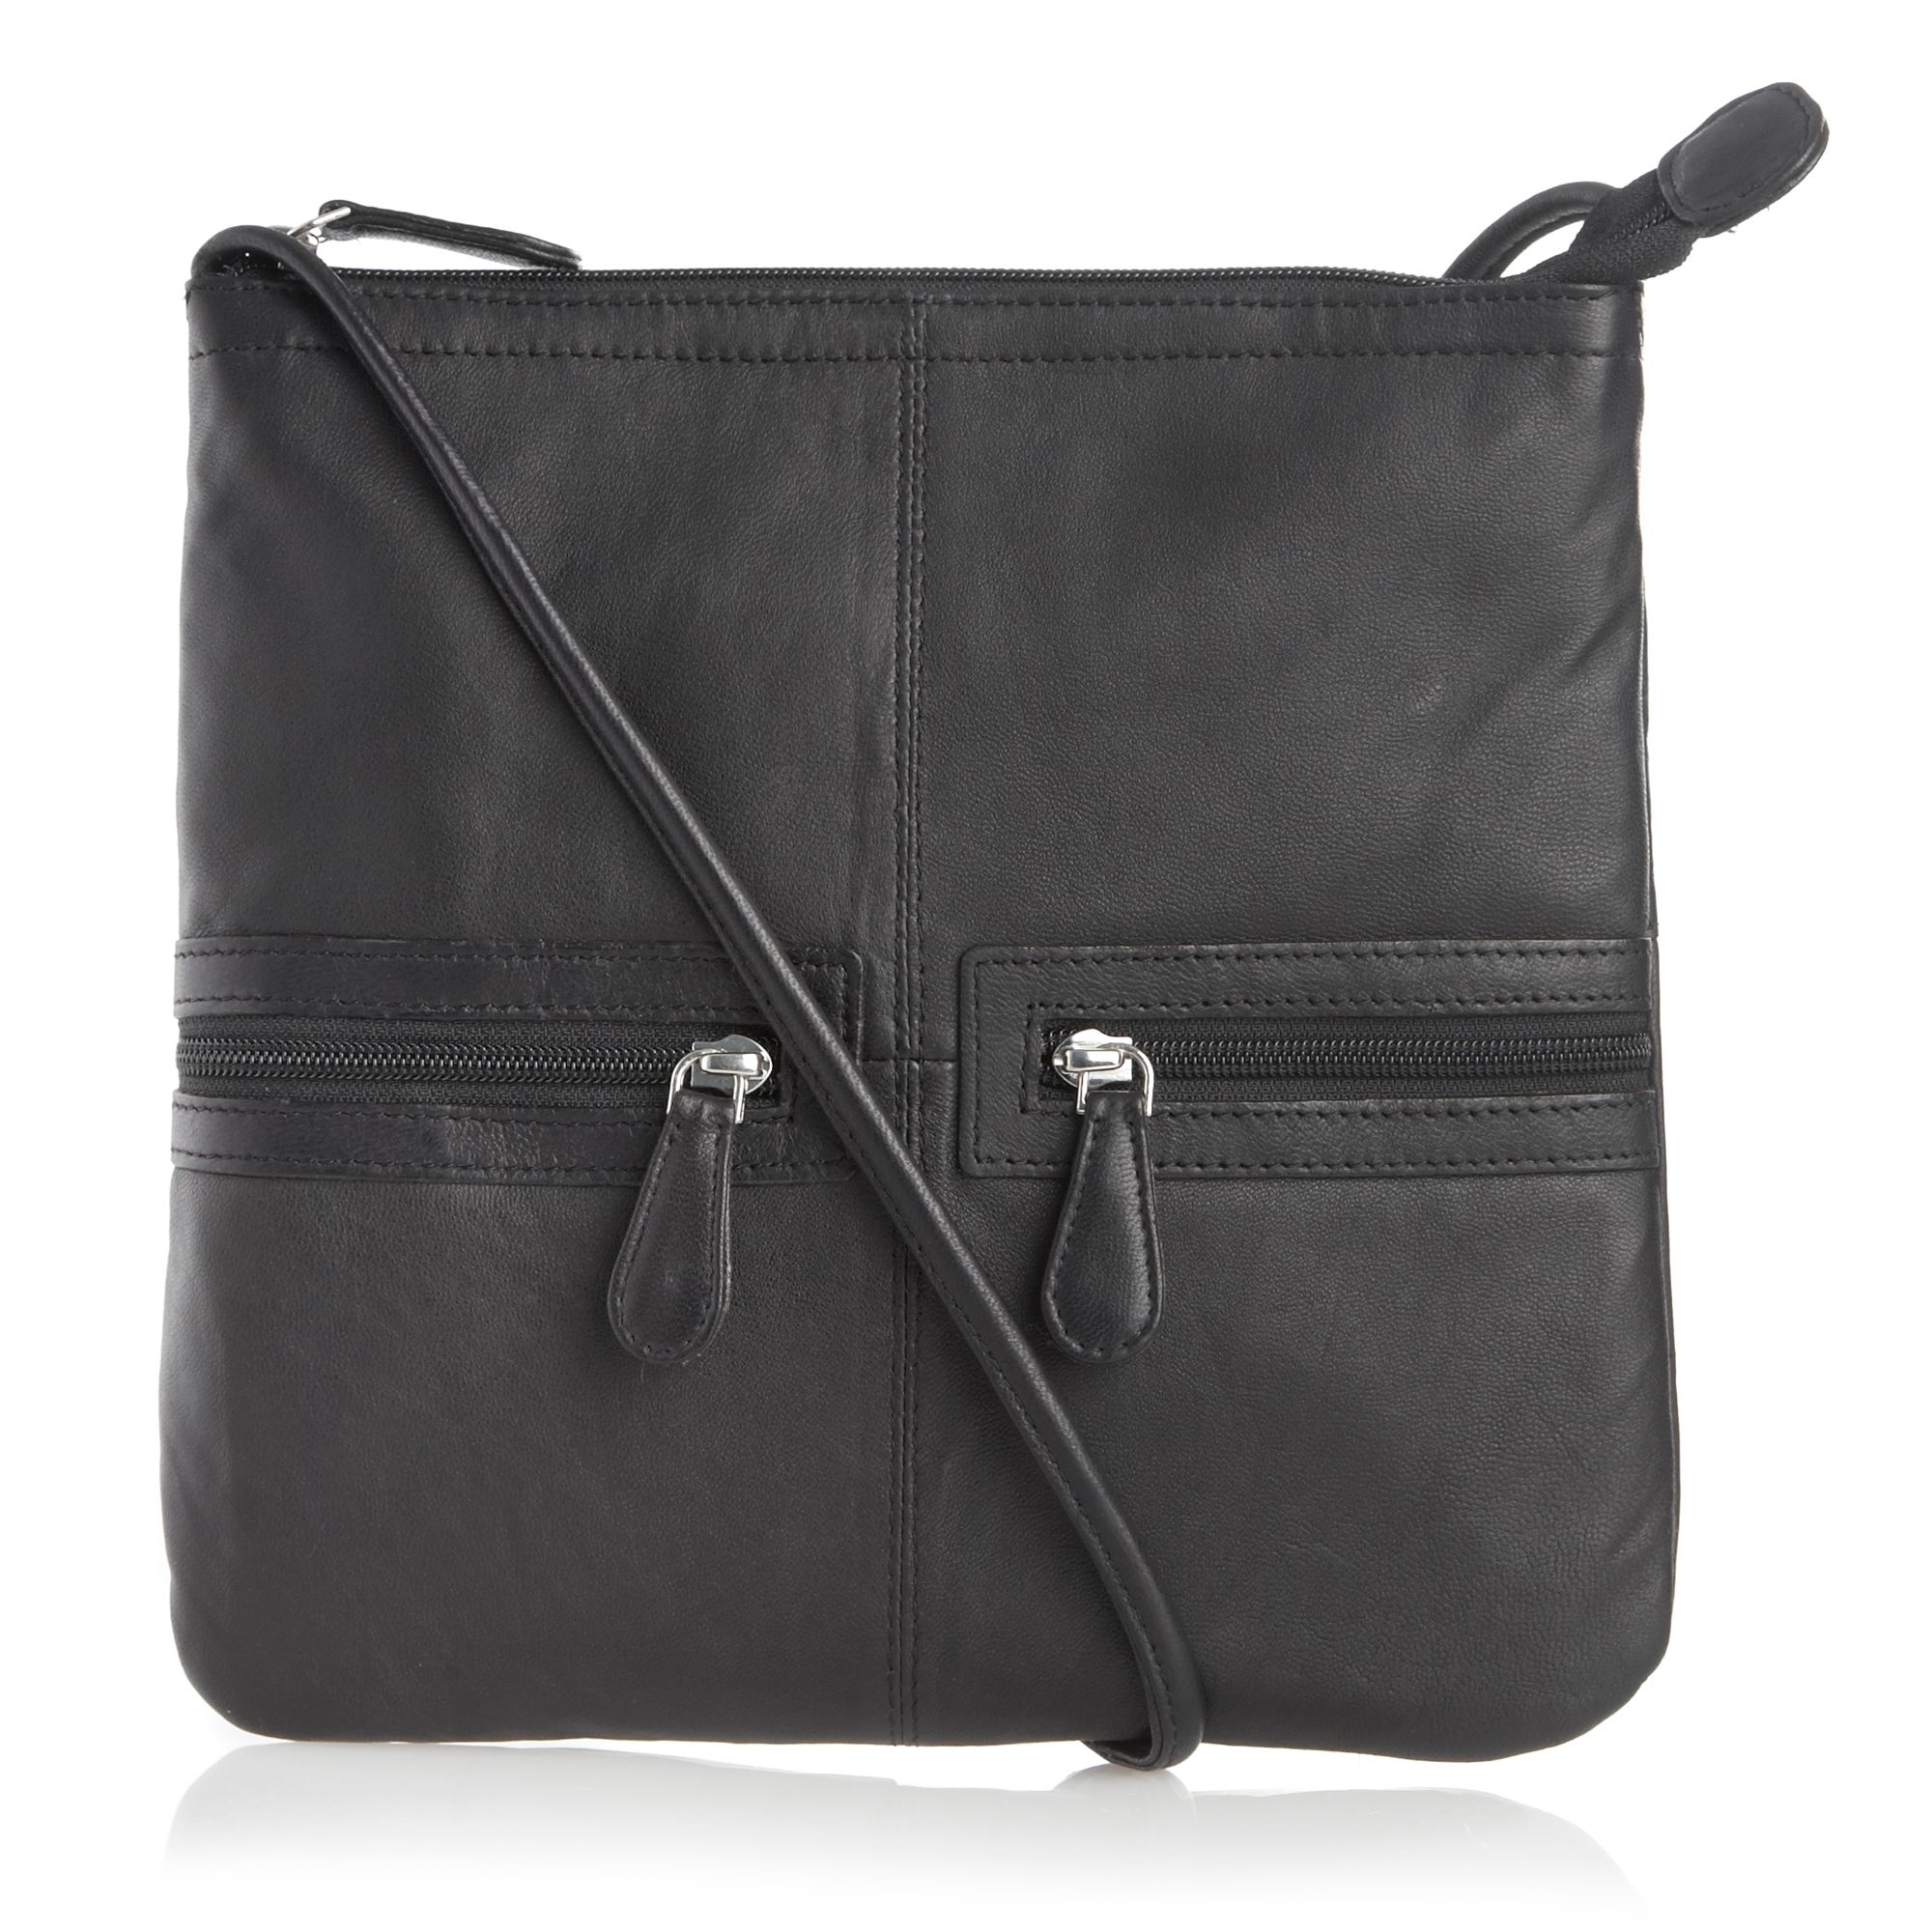 The Collection Womens Black Leather Cross Body Bag From Debenhams | eBay